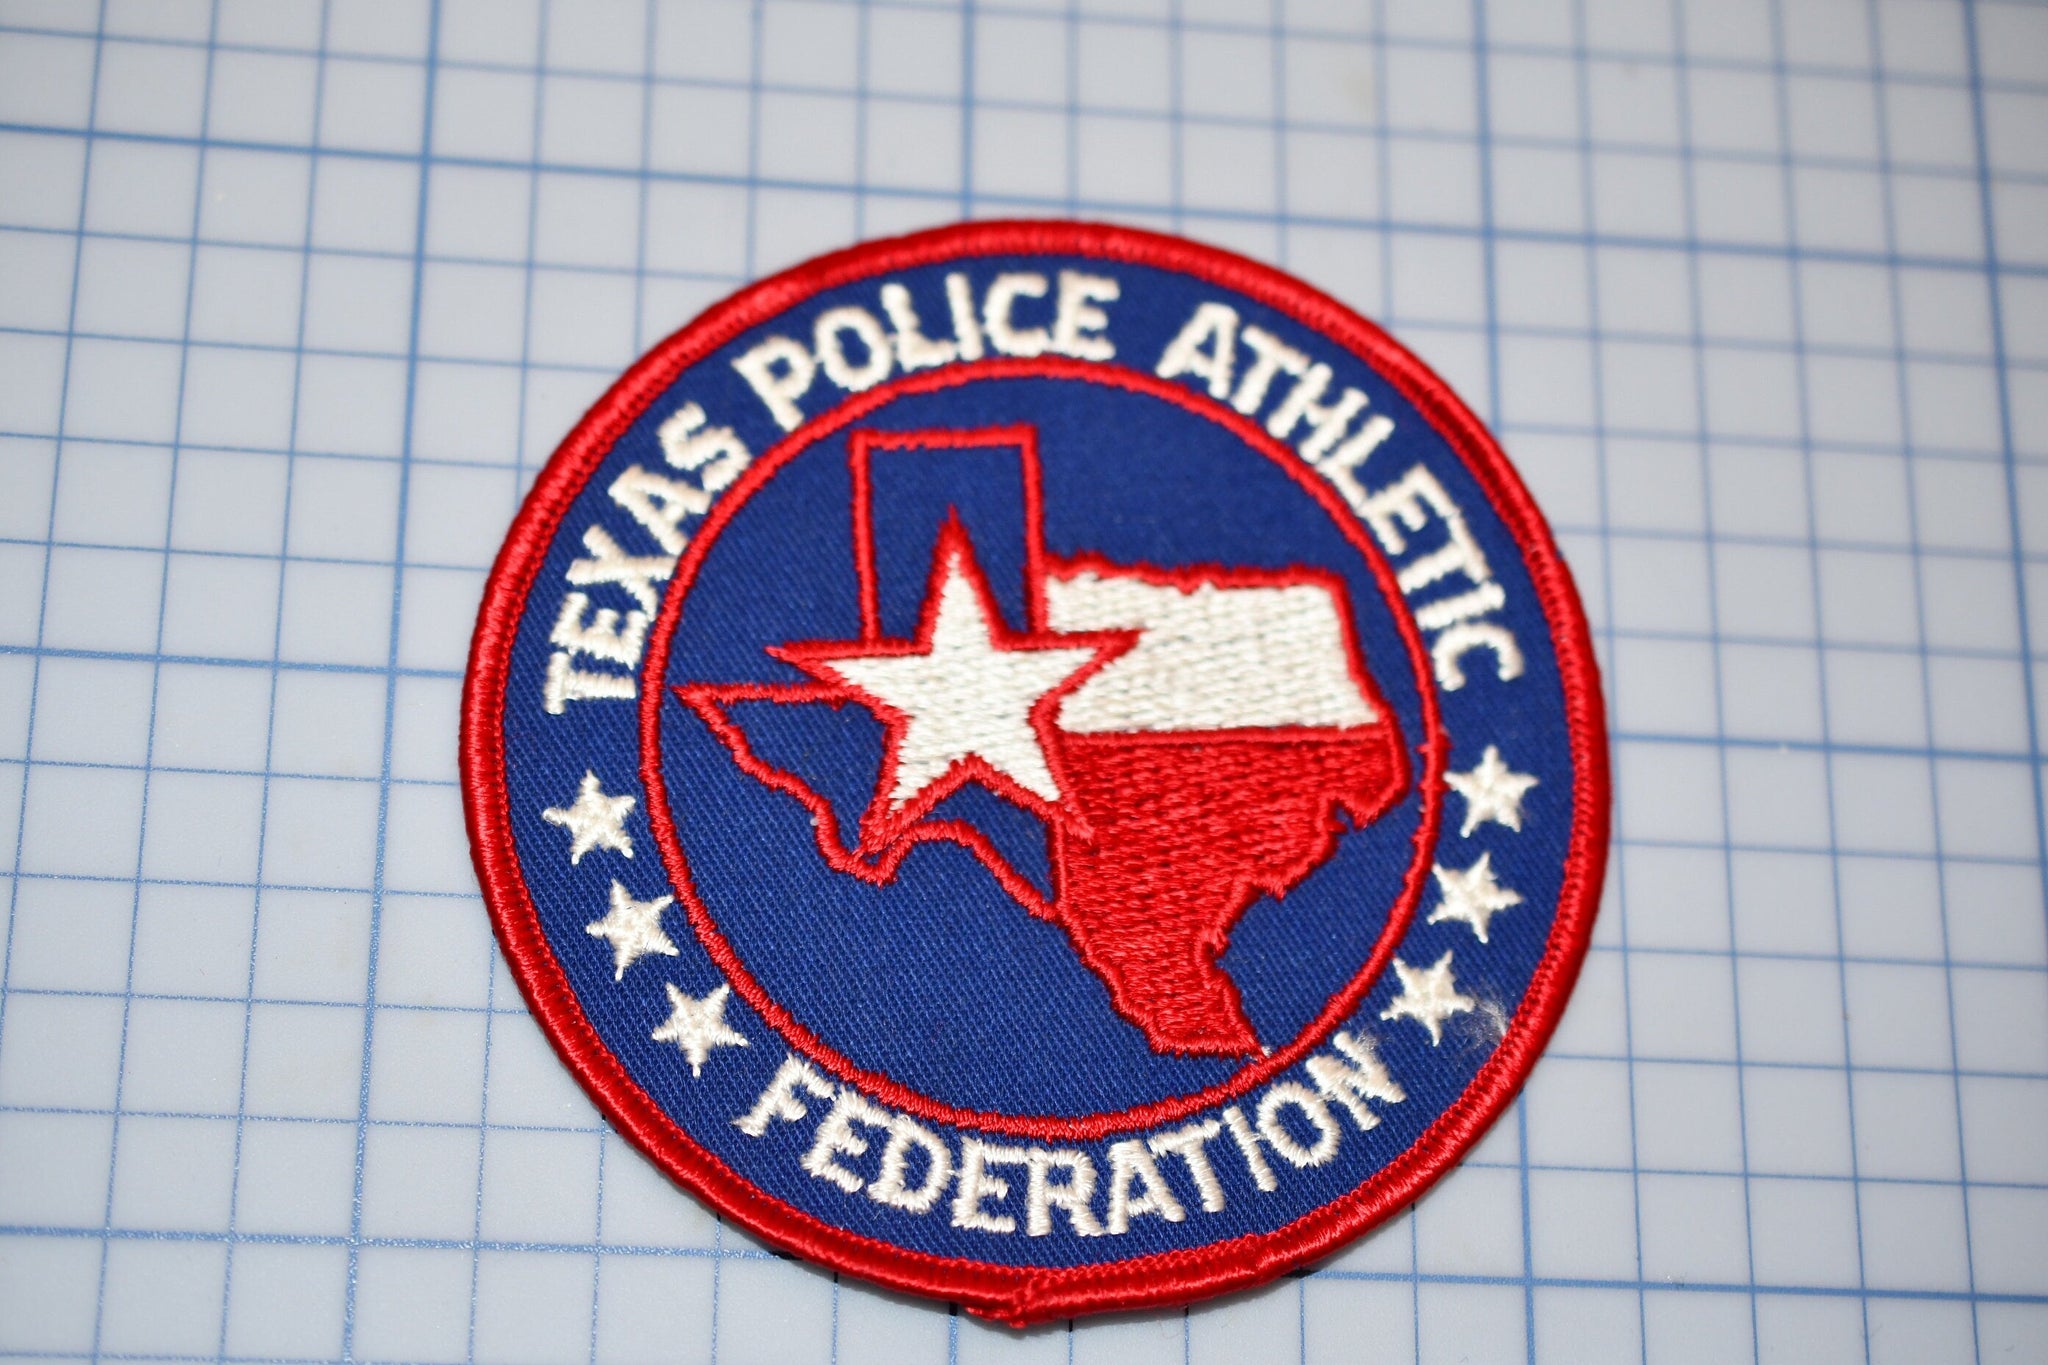 Texas Police Athletic Federation Patch (S4-294)